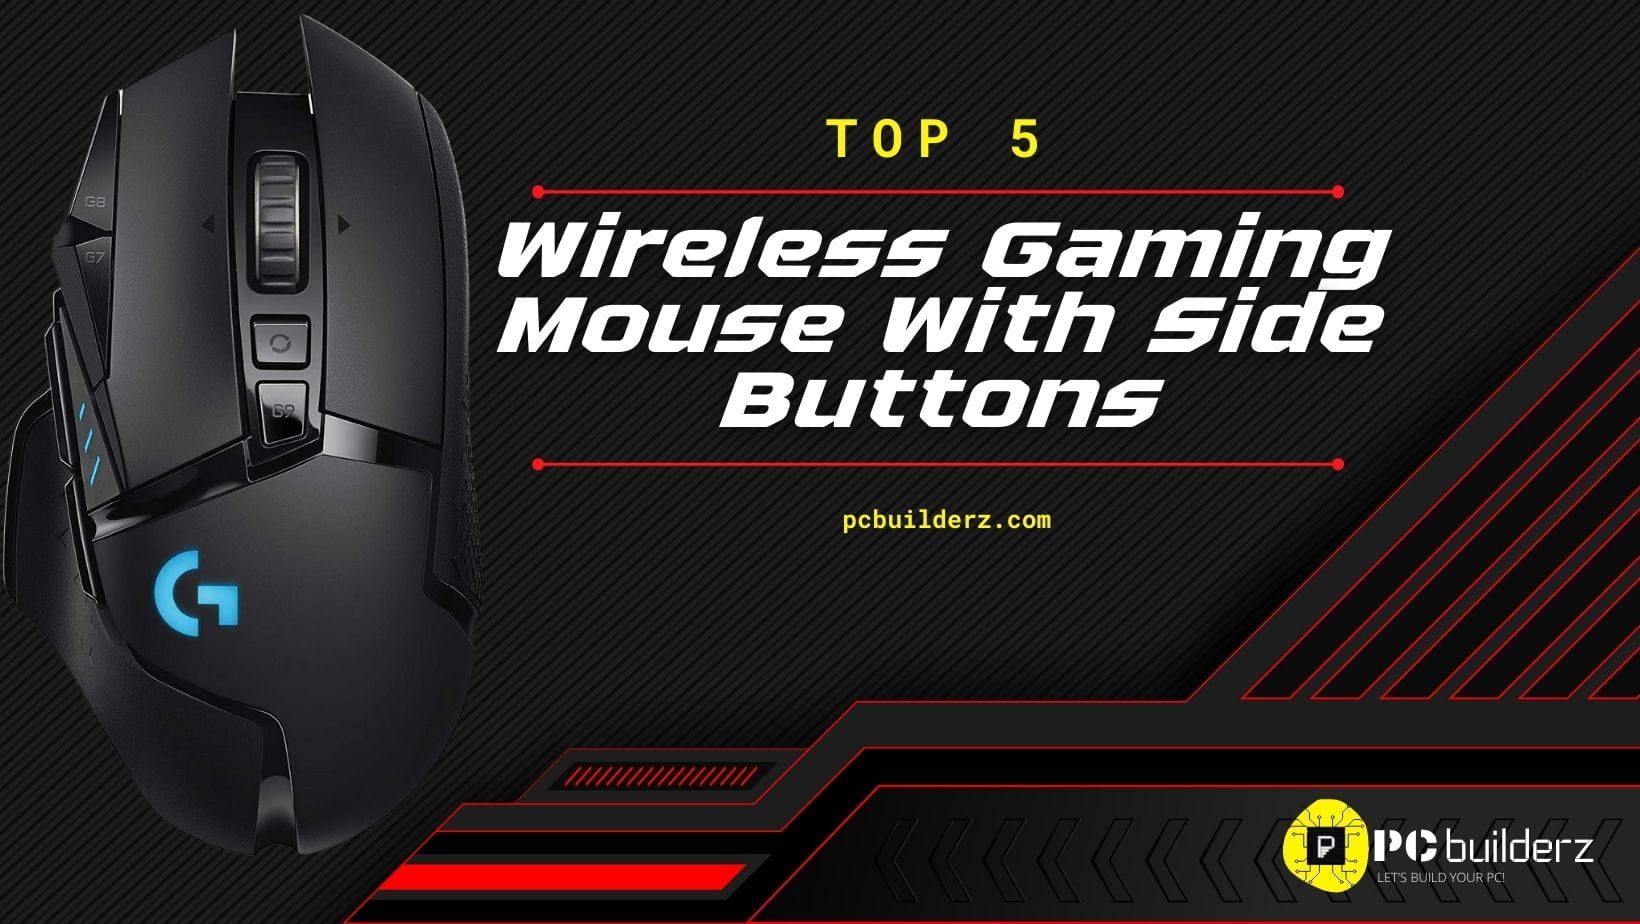 Best Wireless Gaming Mouse With Side Buttons ( Top 5 Under 100 )